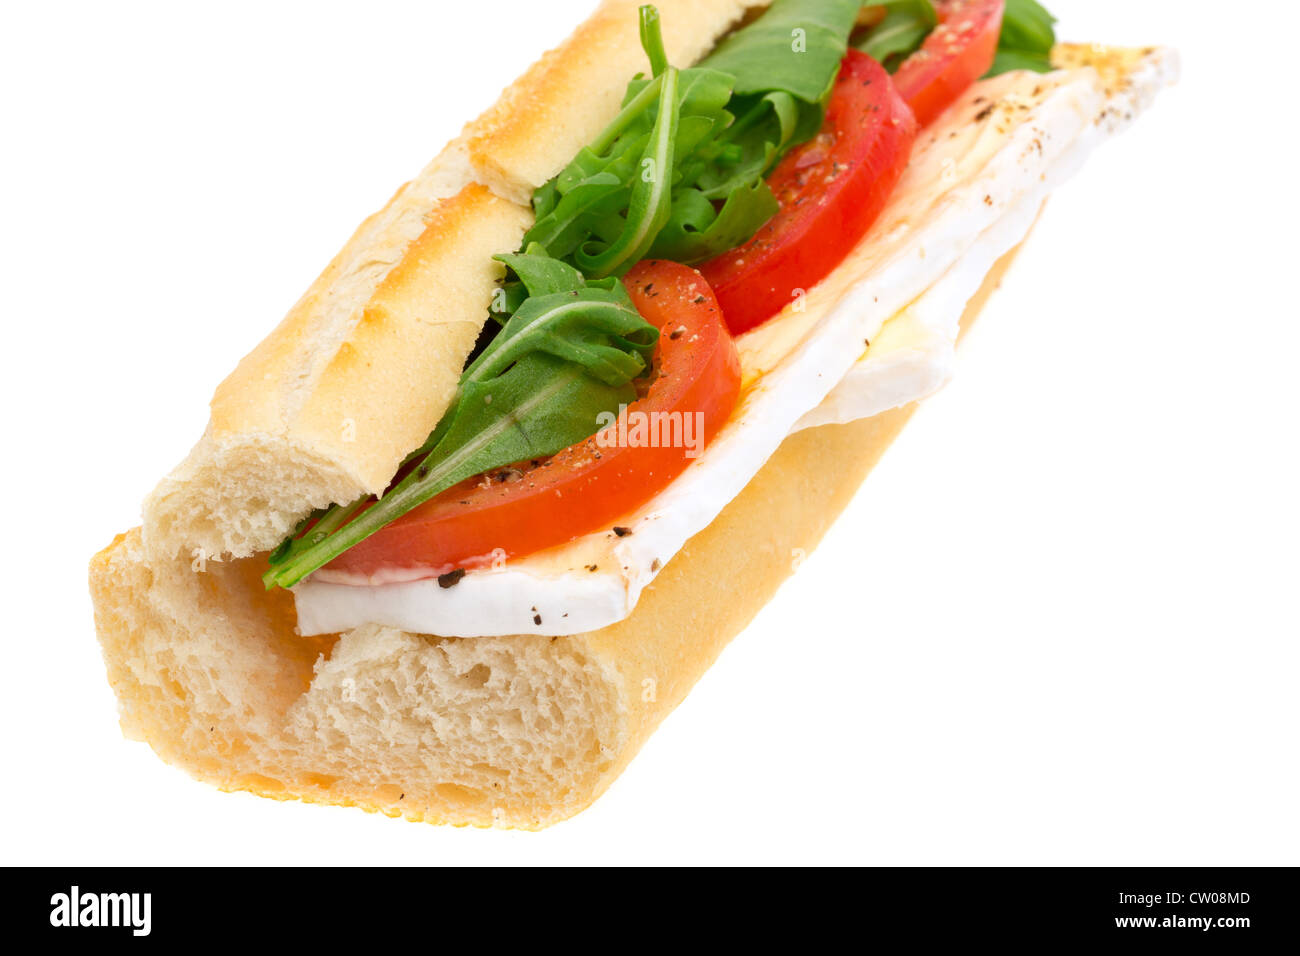 French Baguette filled with brie cheese, sliced tomato and lettuce - studio shot with a white background Stock Photo